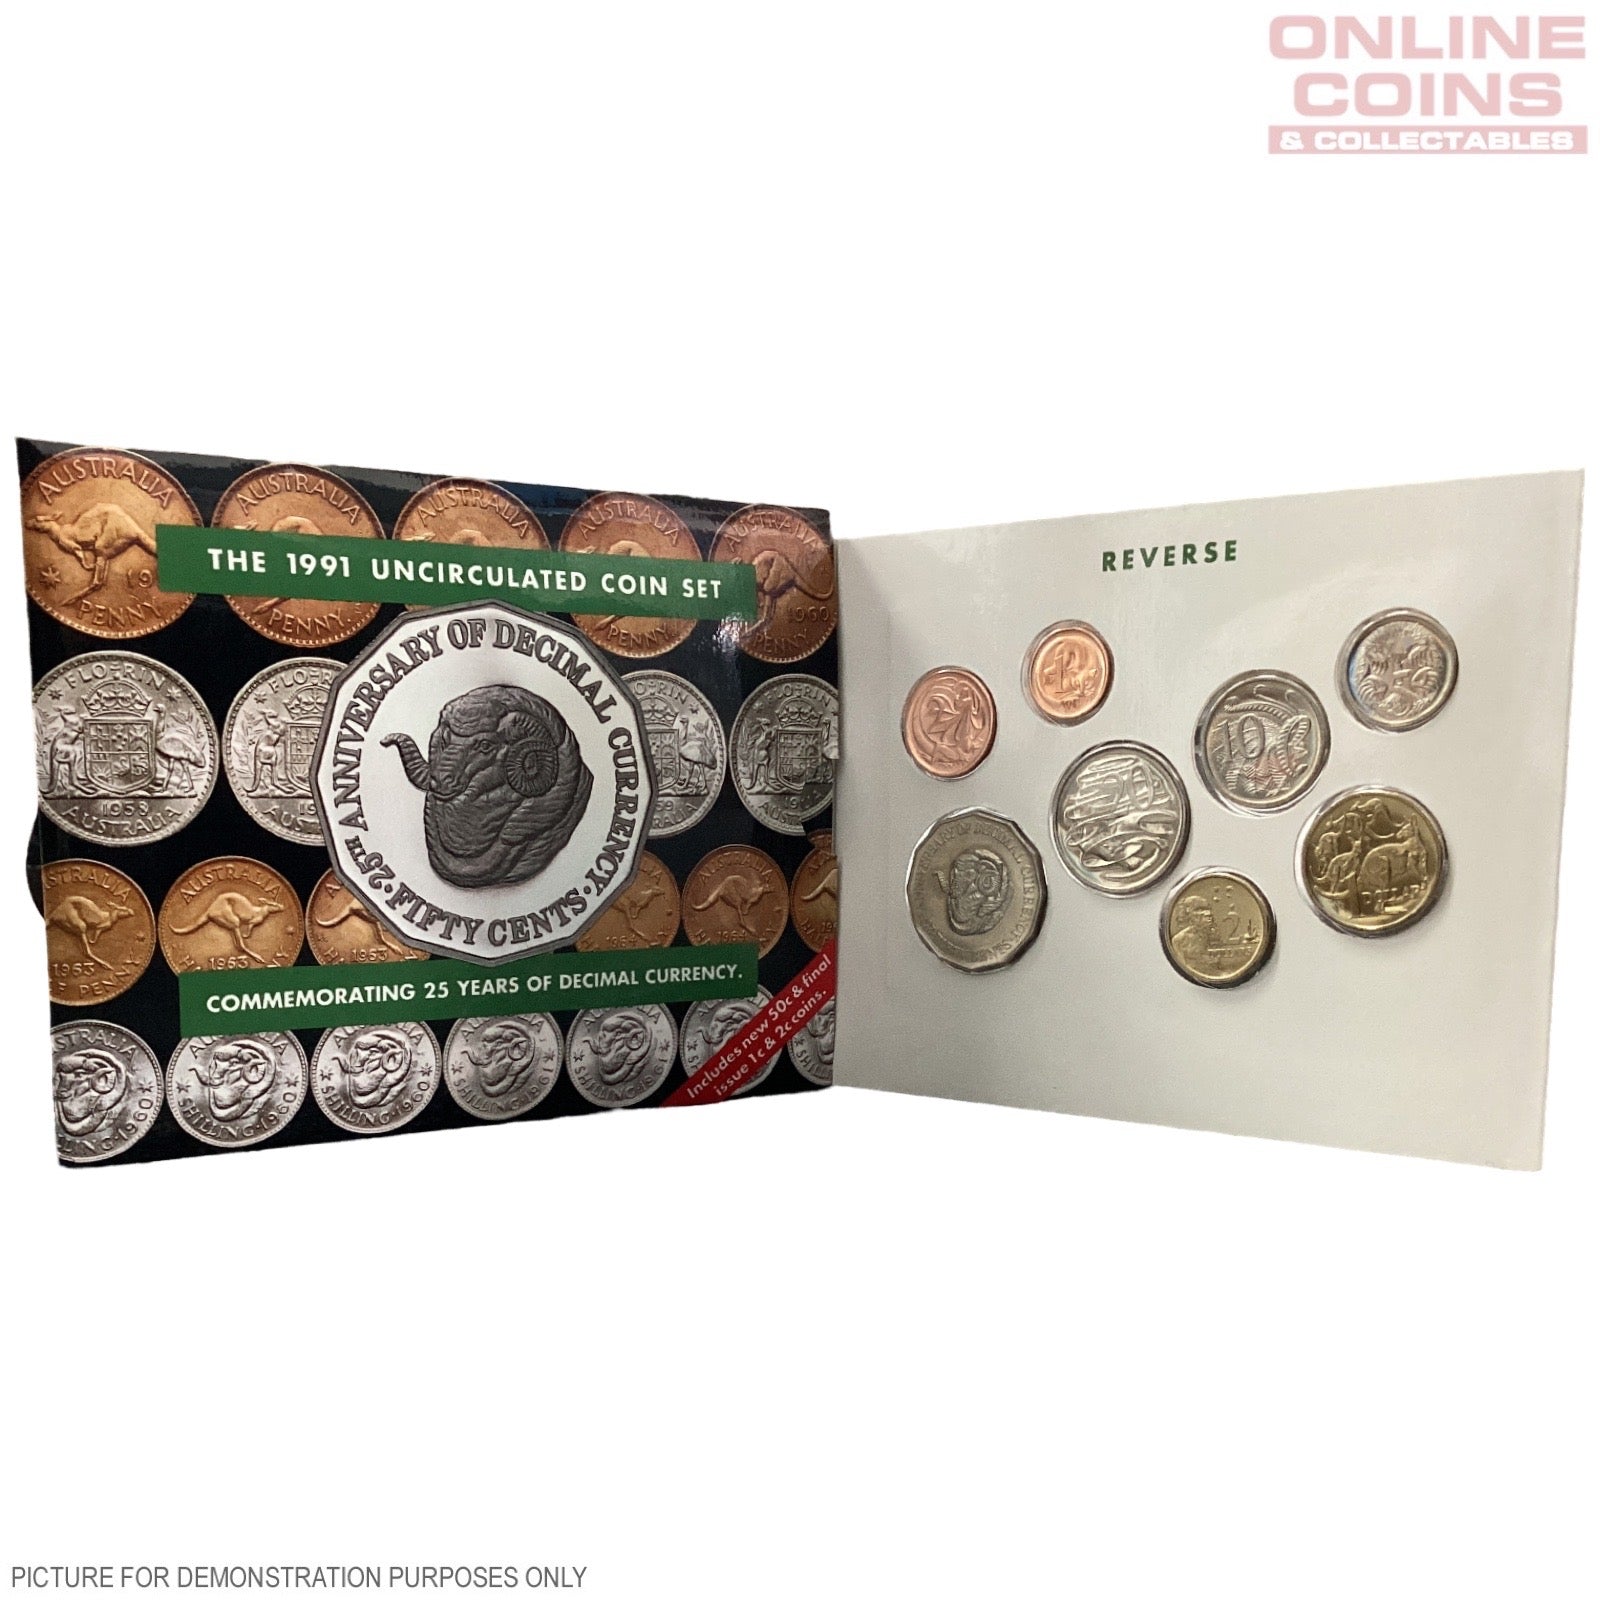 1991 Uncirculated Set (Tarnished 50c coin)